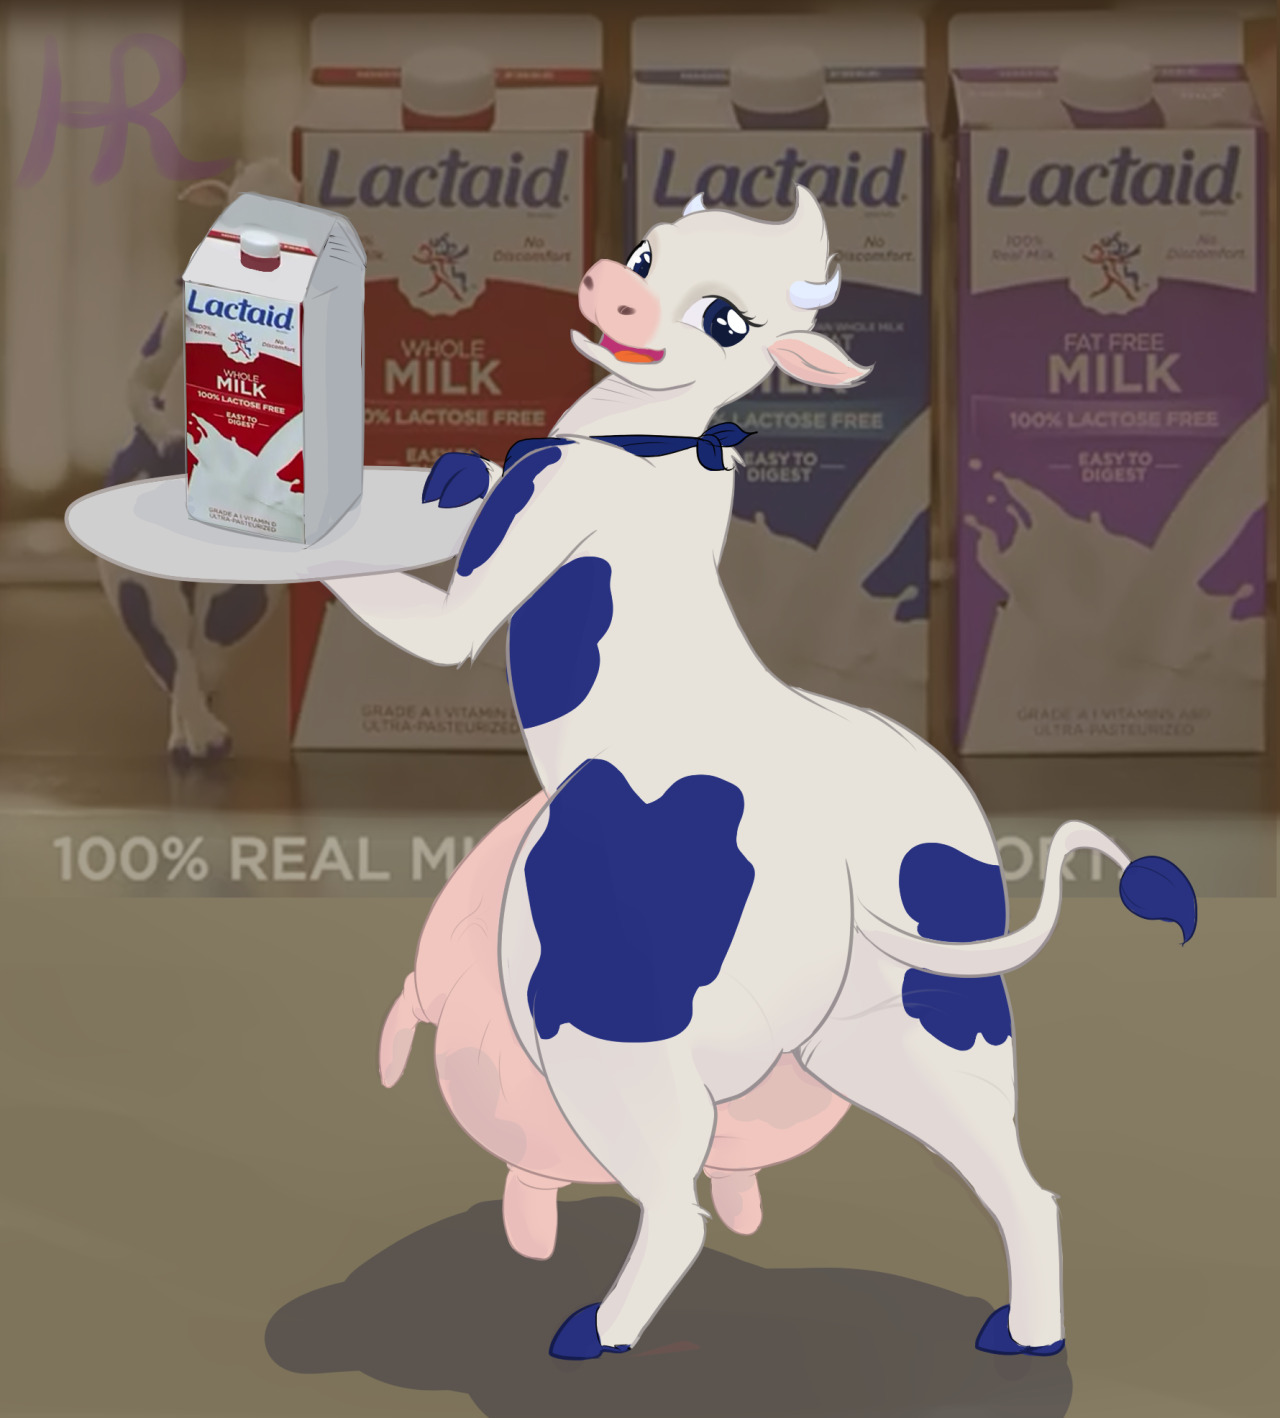 https://www.youtube.com/watch?v=qvW-lAFmZ7cI took a wack at the Cute cow mascot from